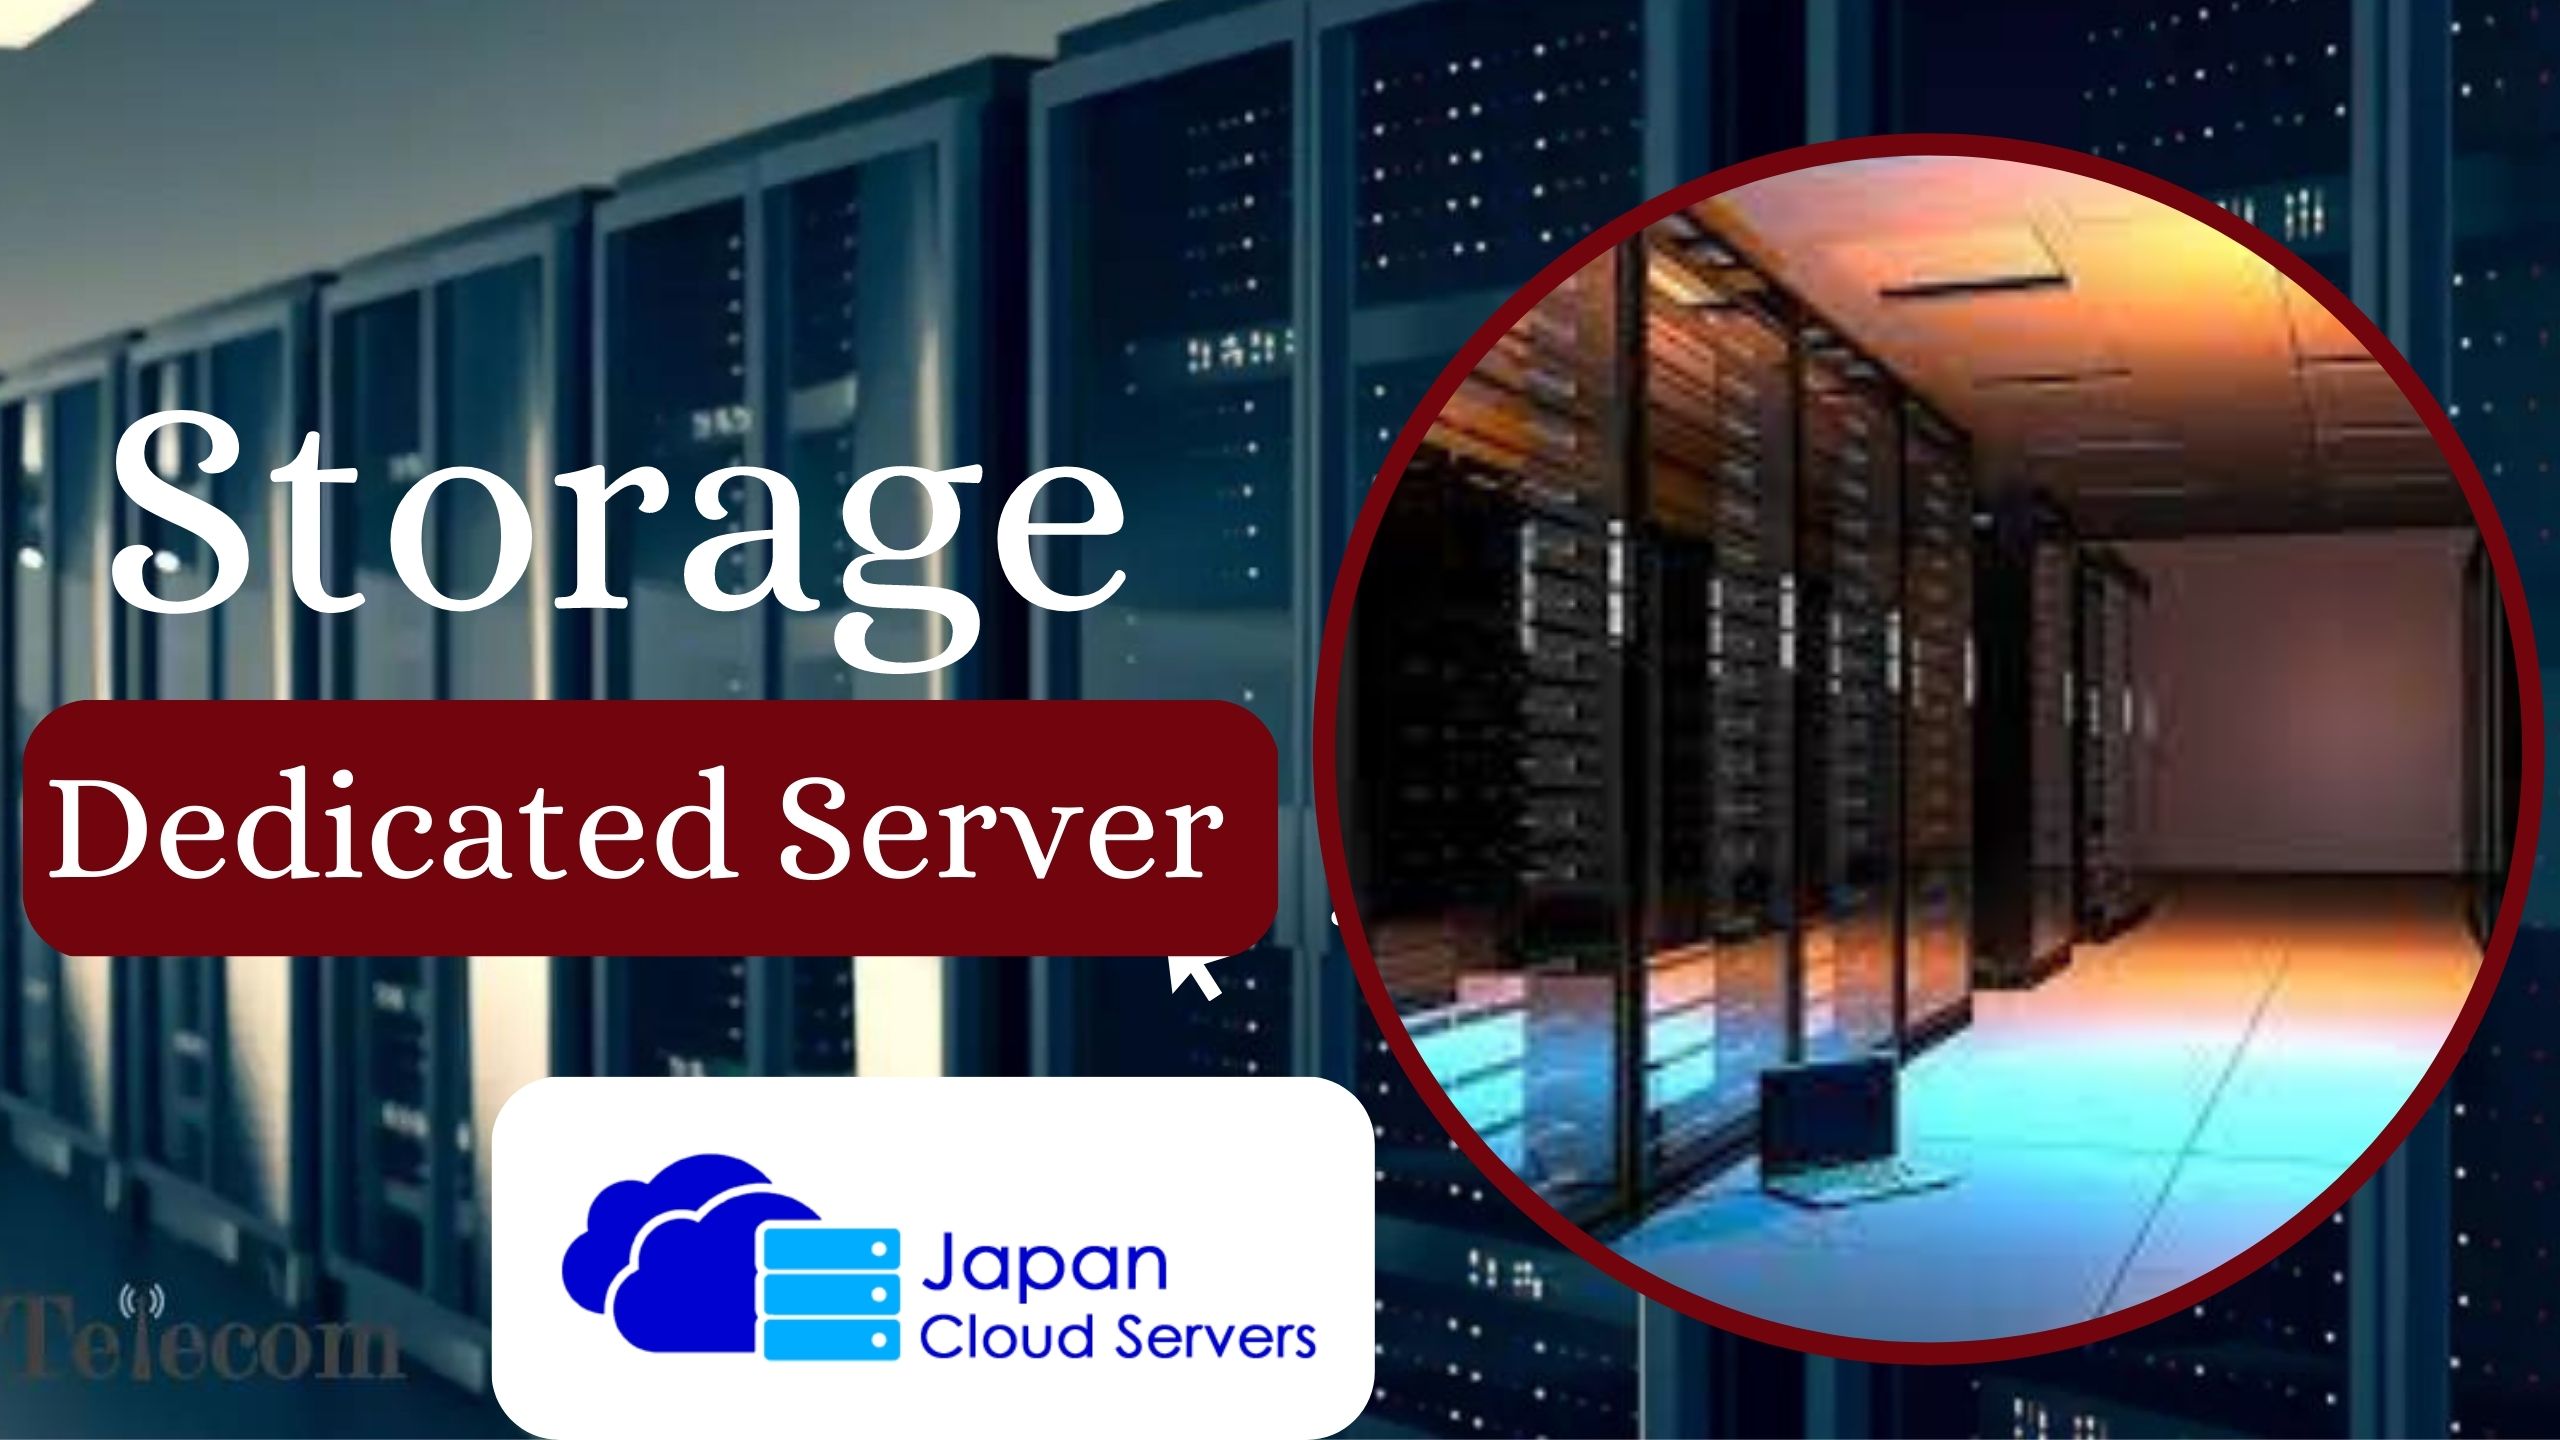 Storage Dedicated Server – Your Key to Achieving Business Goals